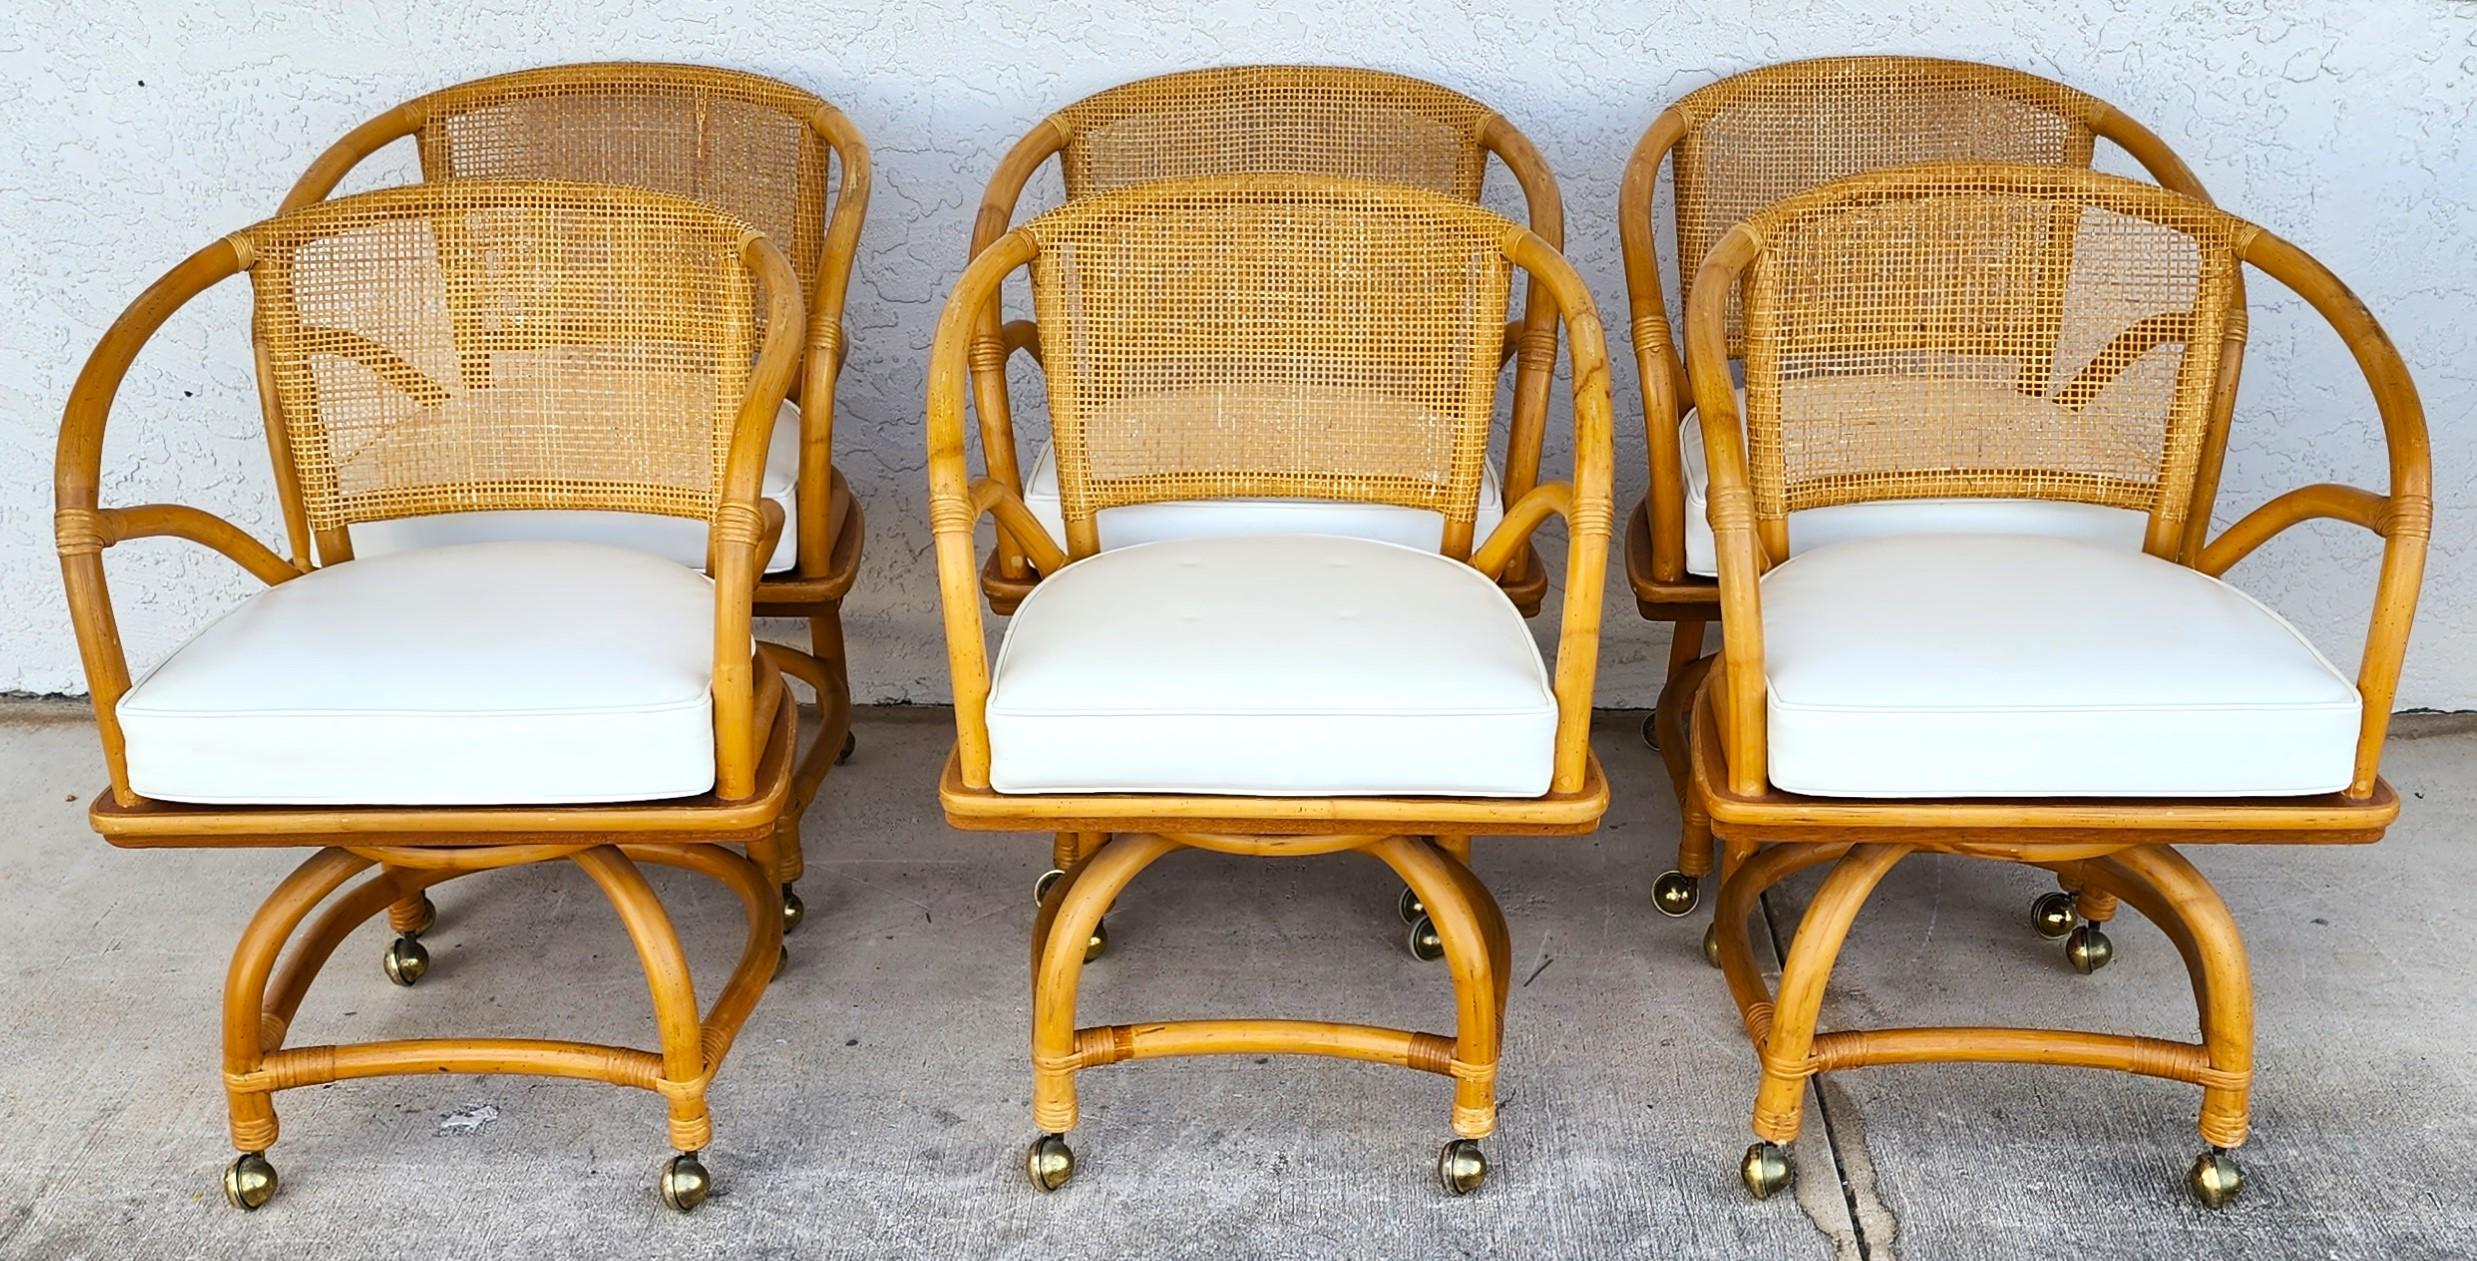 Offering One Of Our Recent Palm Beach Estate Fine Furniture Acquisitions Of A
Set of 6 1970s Bamboo Cane Back & Rattan Dining or Game Chairs with Swivel & Rolling by FICKS REED.
Includes reversible Vinyl air-cushioned seats.

Approximate